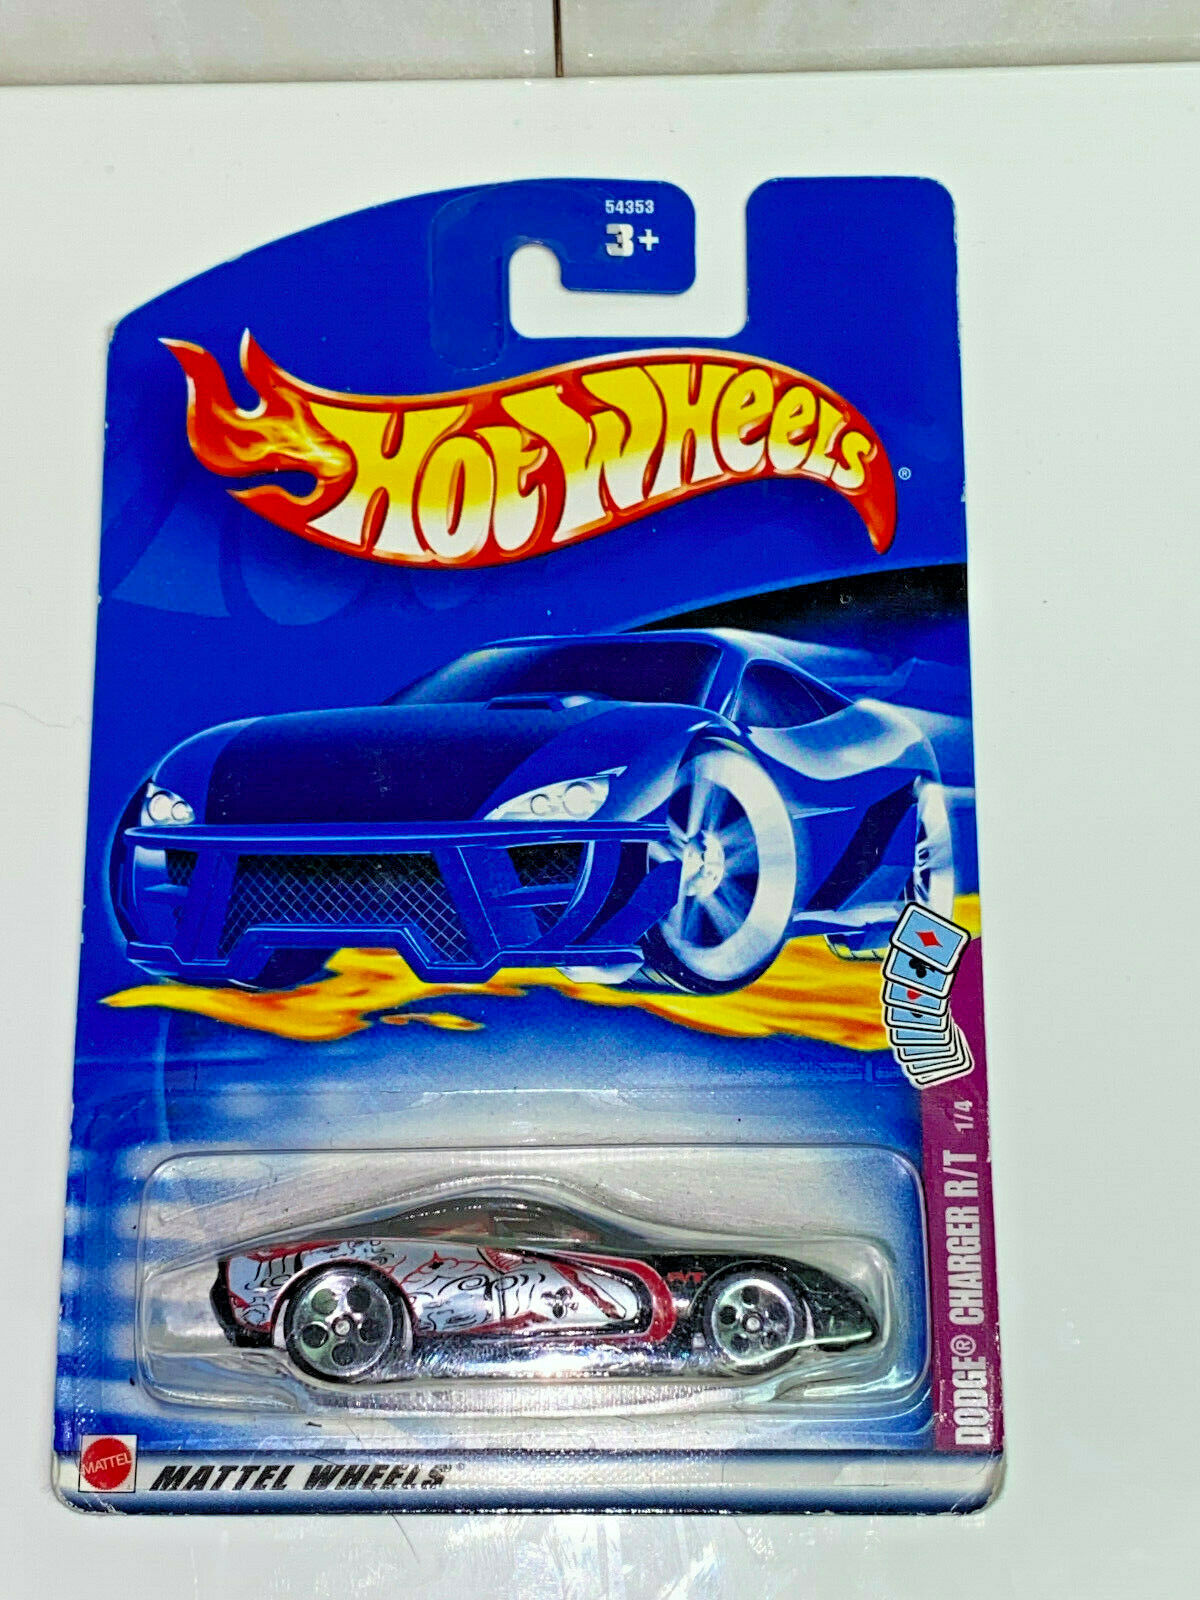 2002 Hot Wheels Wild Aces Full Set of 4 NIP Collector #071,#072,#073,#074